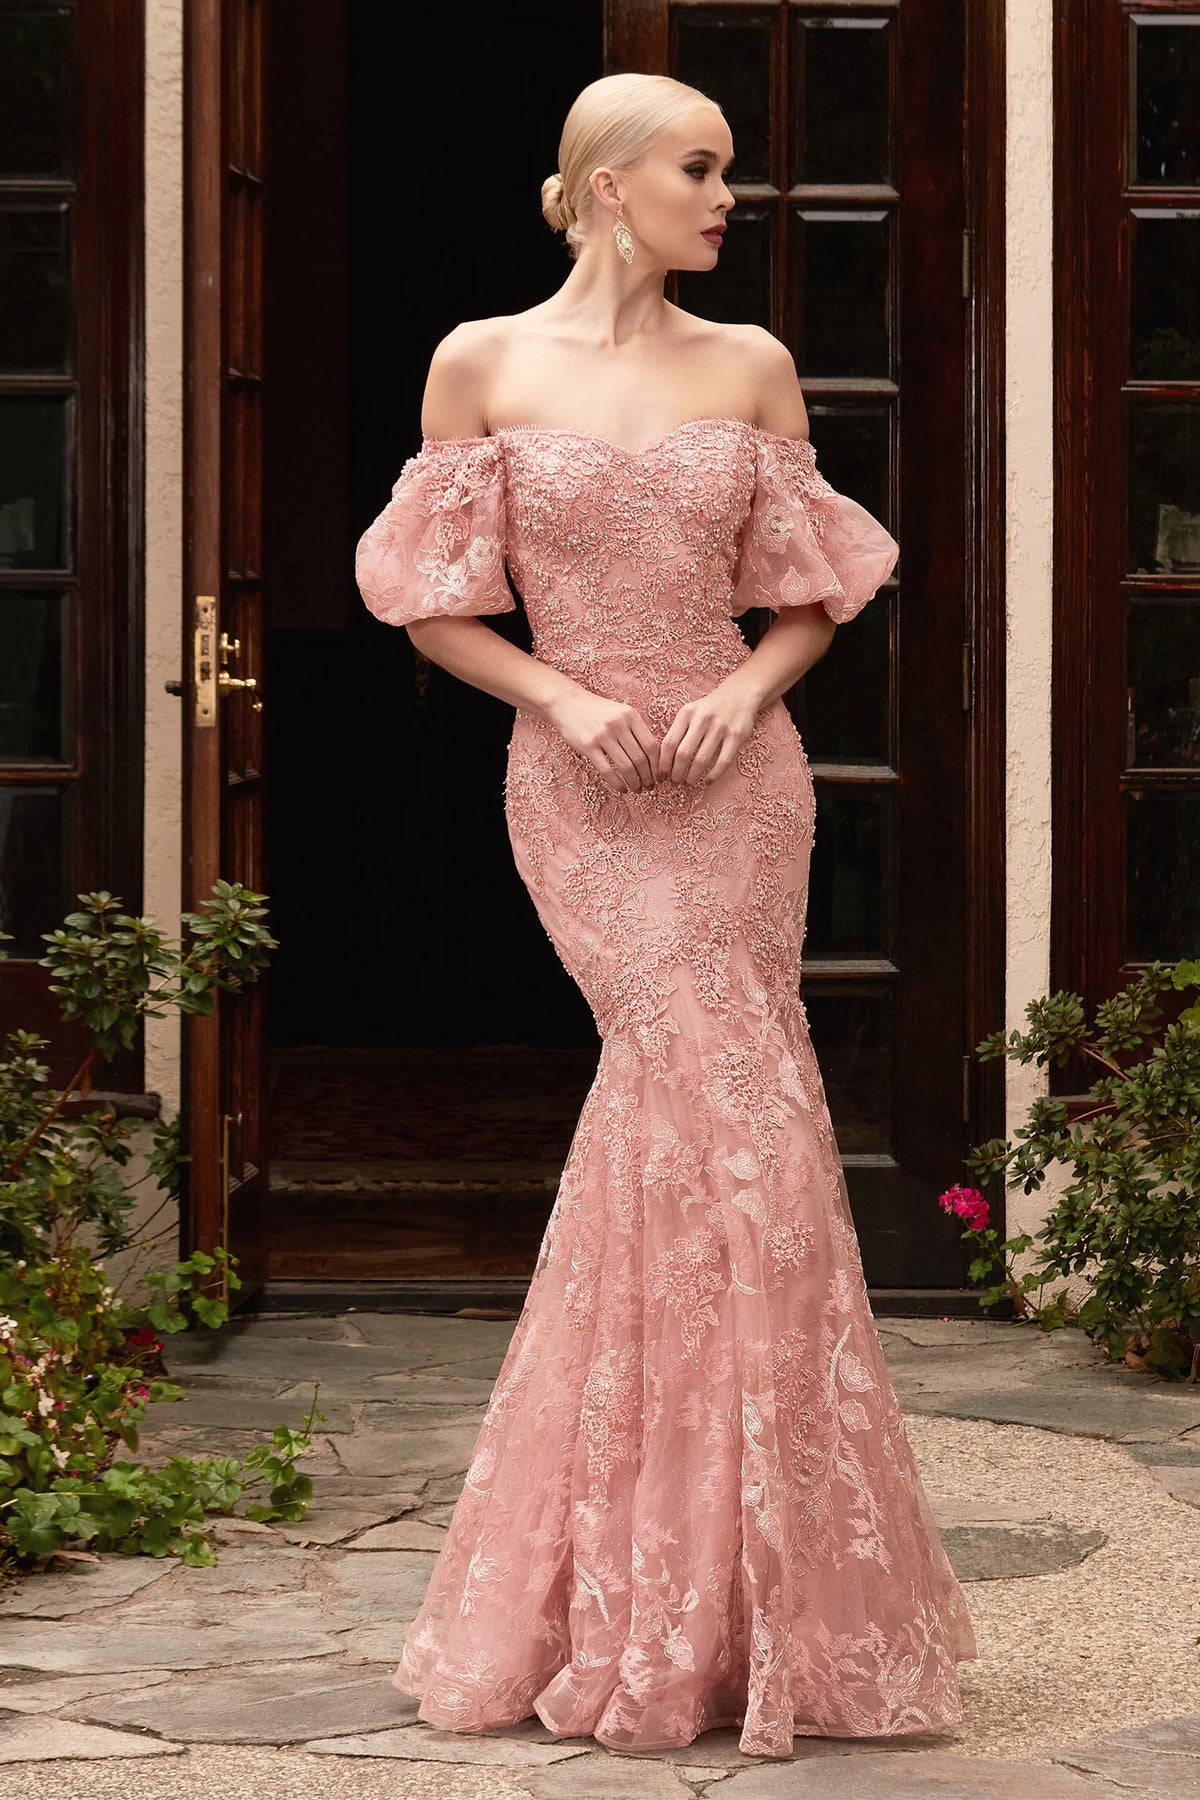 LaDivine CD959 Enchanting Lace Off-the-Shoulder Mermaid Gown, featuring a fitted silhouette, off-the-shoulder neckline, puff sleeves, and intricate lace detailing from head to toe. Perfect for elegant evening occasions.  This is a front view of the dress in color dusty rose..